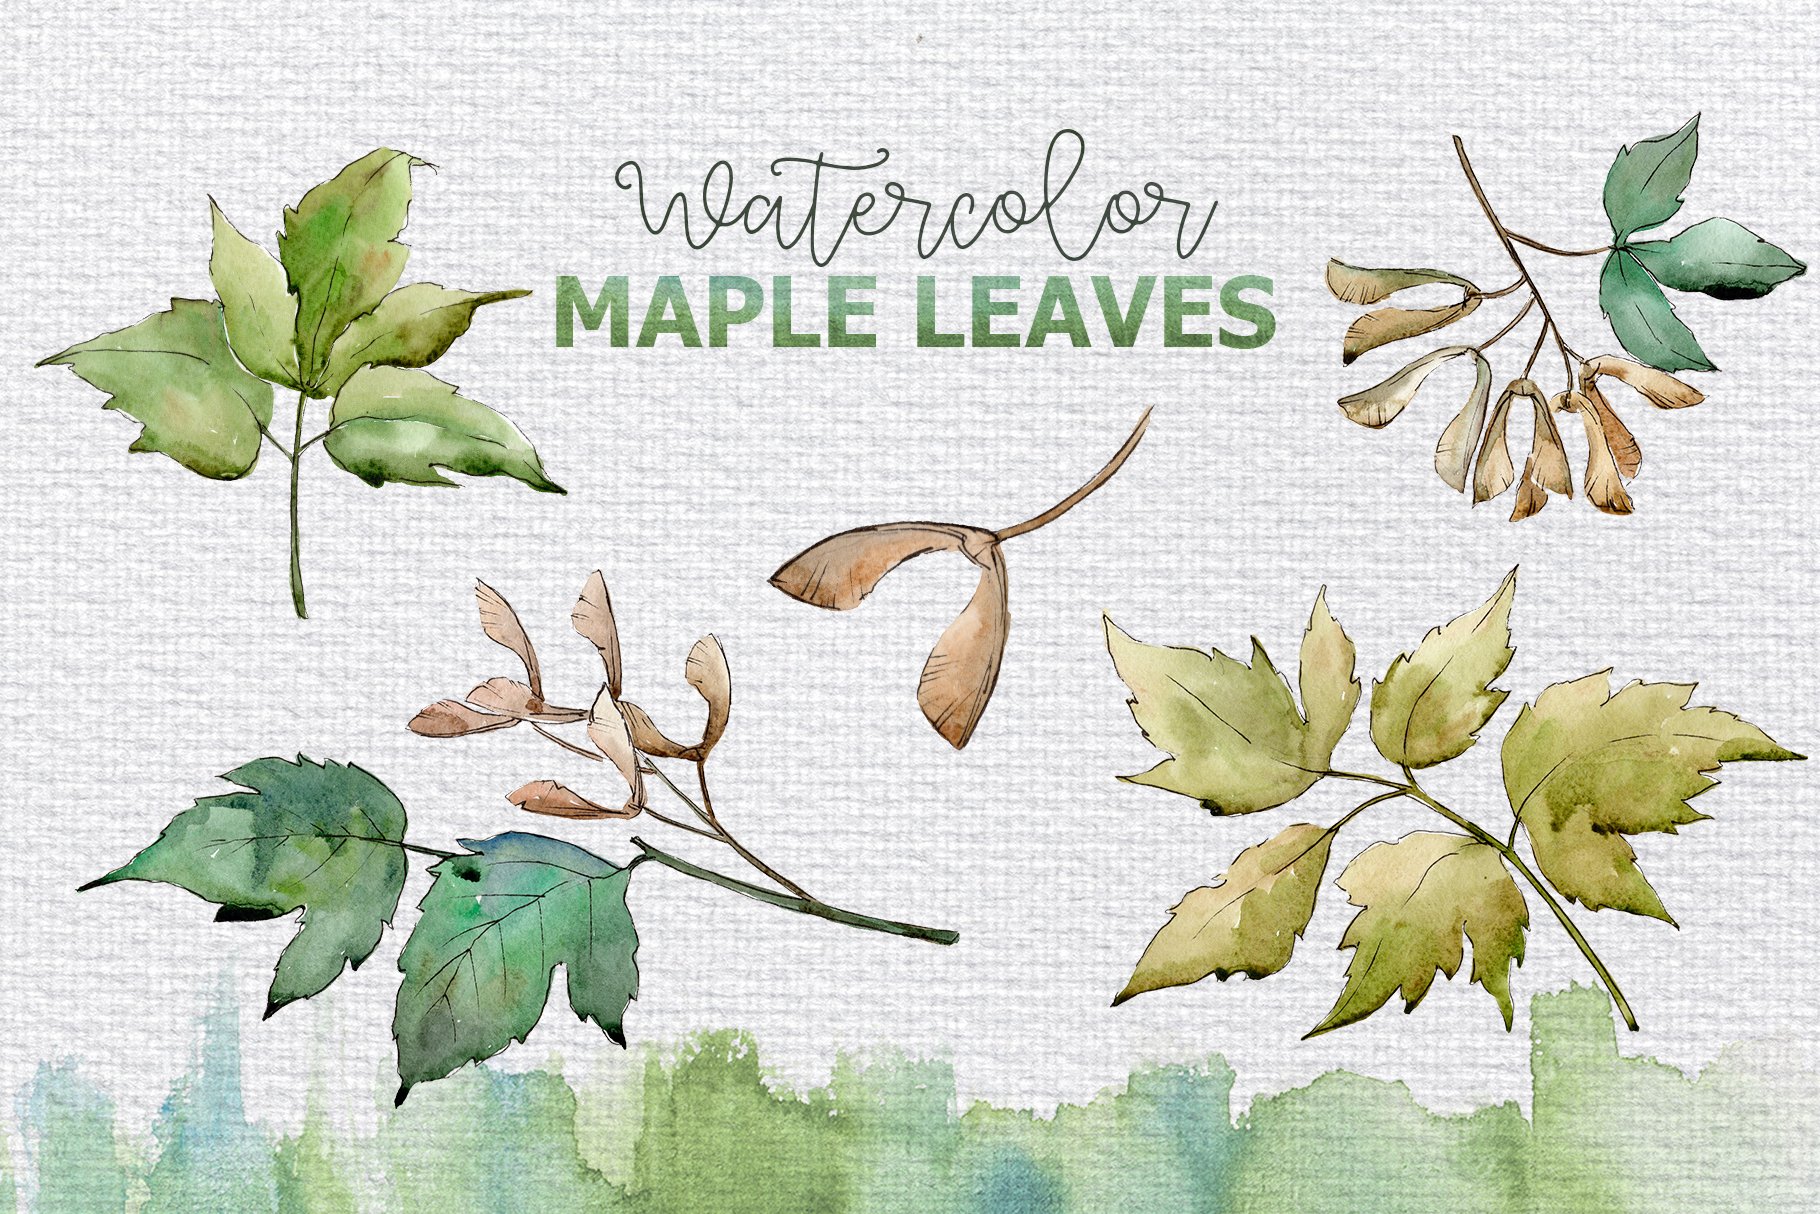 Watercolor maple leaves on a white background.